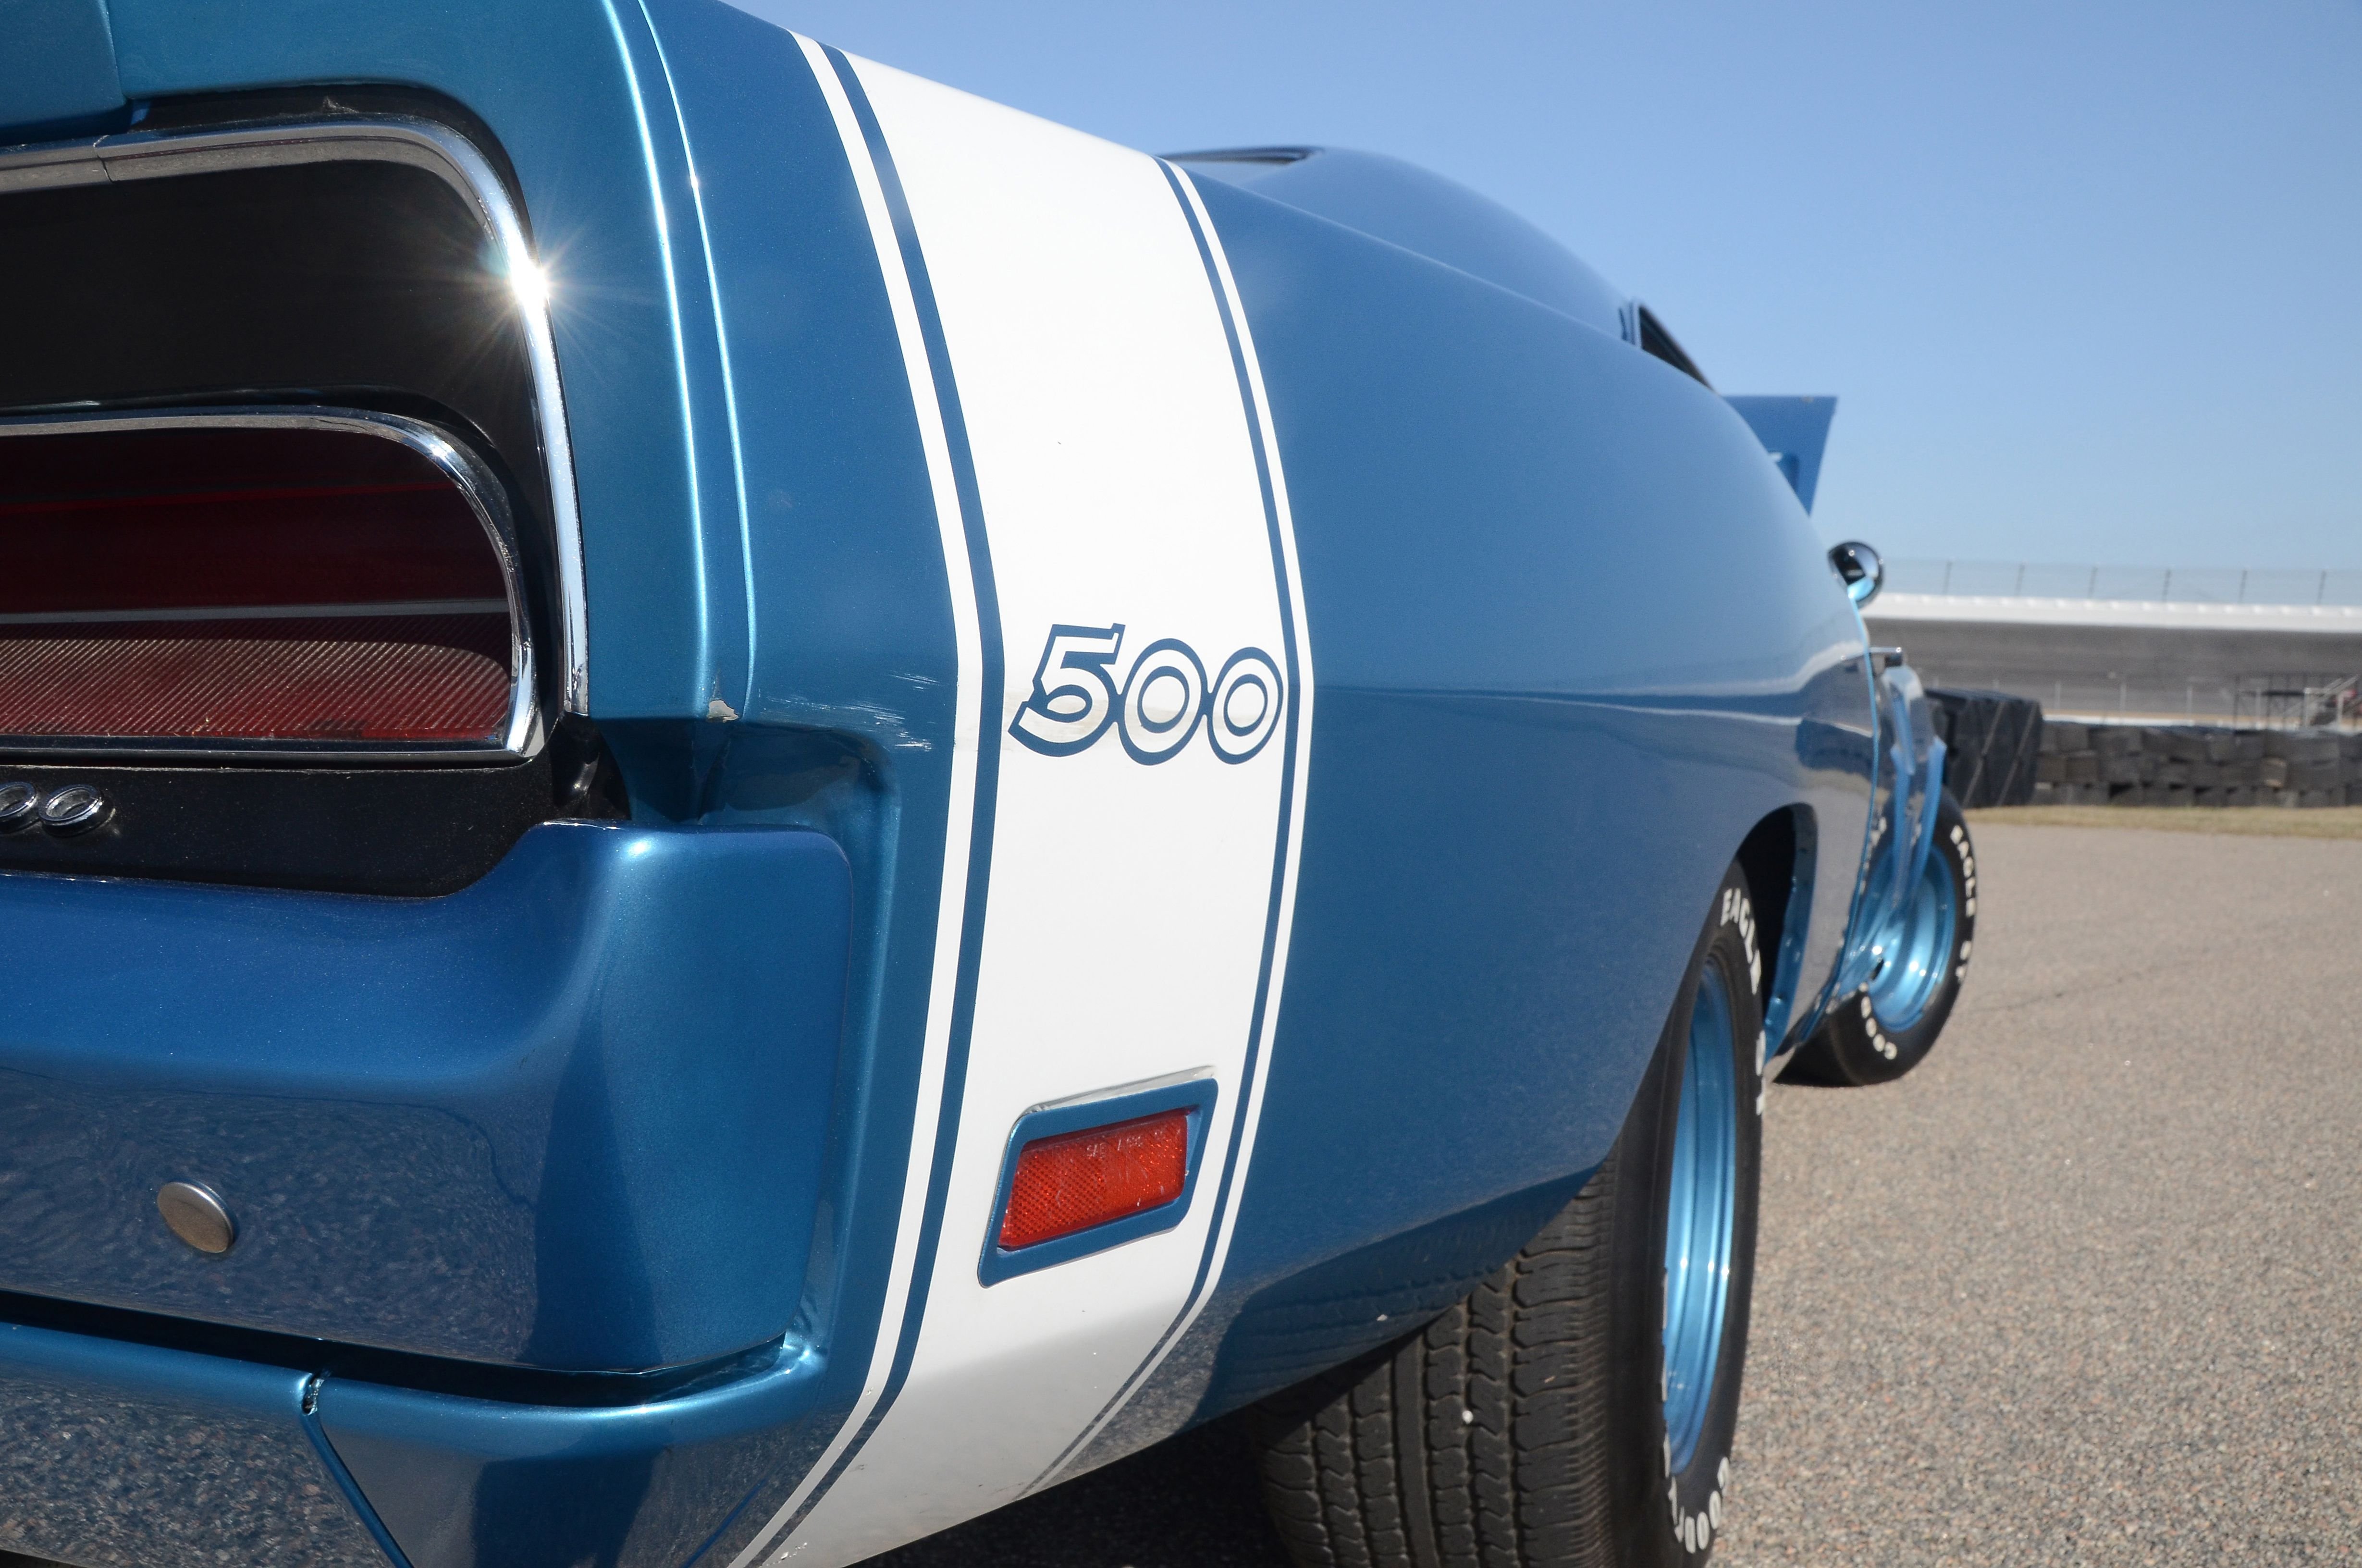 1969, Dodge, Charger, 500, Nascar, Race, Racing, Muscle, Hot, Rod, Rods, Classic Wallpaper